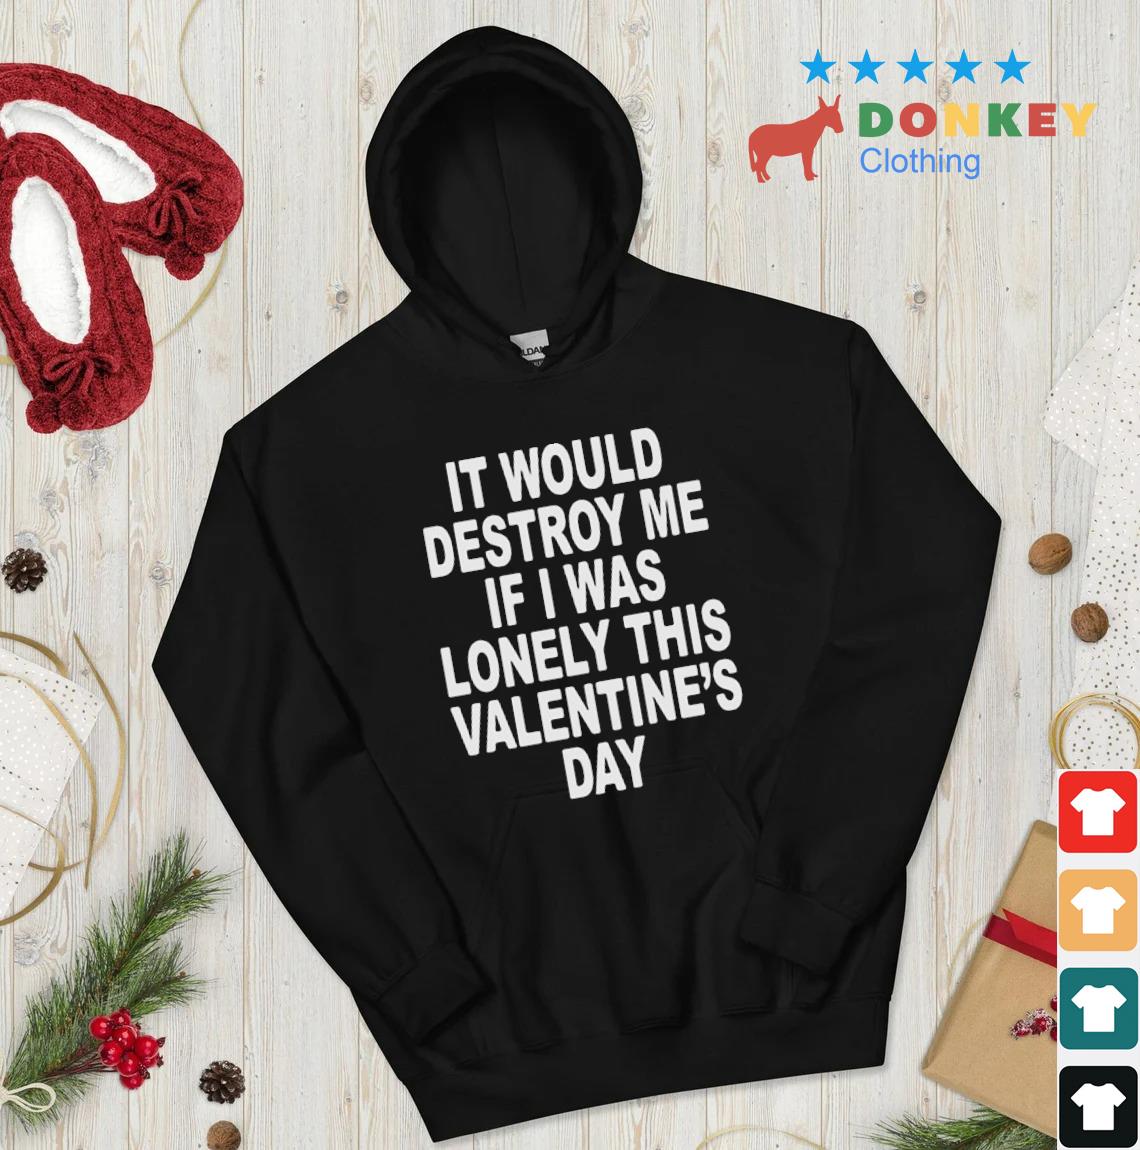 It Would Destroy Me If I Was Lonely This Valentine's Day Shirt hoodie don den